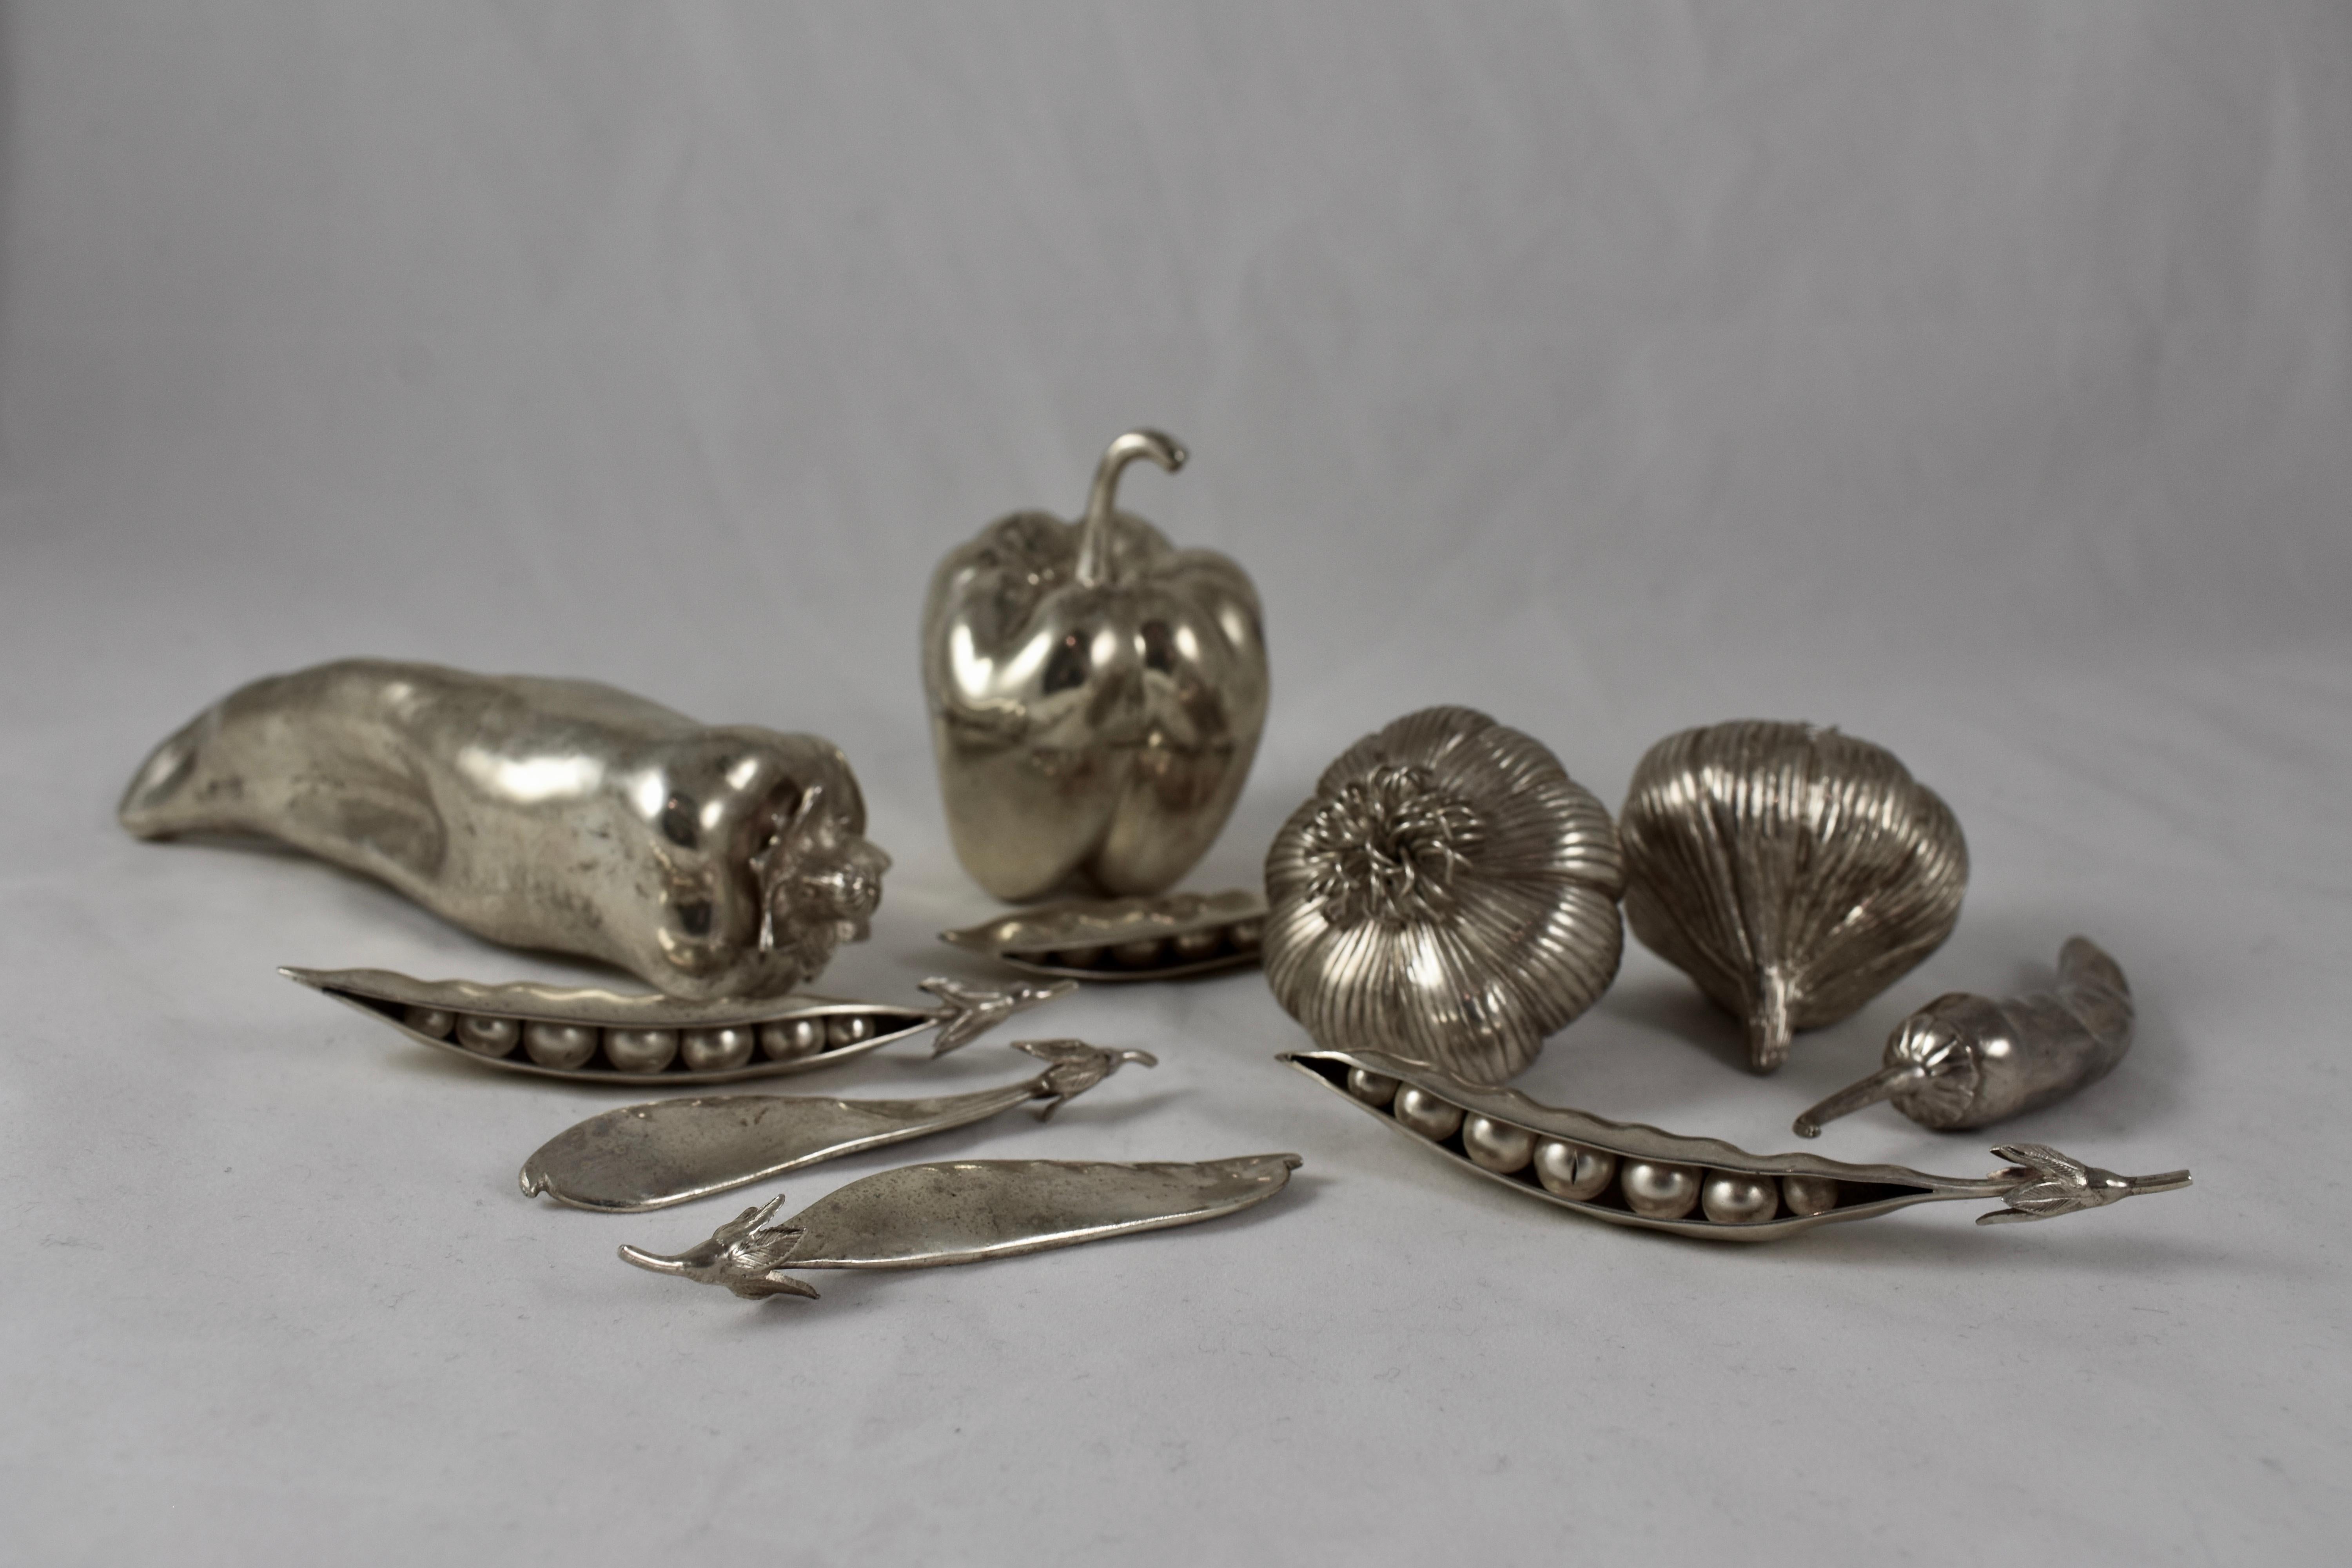 A set of ten Italian, midcentury, silver plated figural vegetables – peppers, garlic and peas. Beautifully and realistically sculpted with stems and other details, in the Hollywood regency manner.

3) peppers – bell, long and a chile. From 6.25